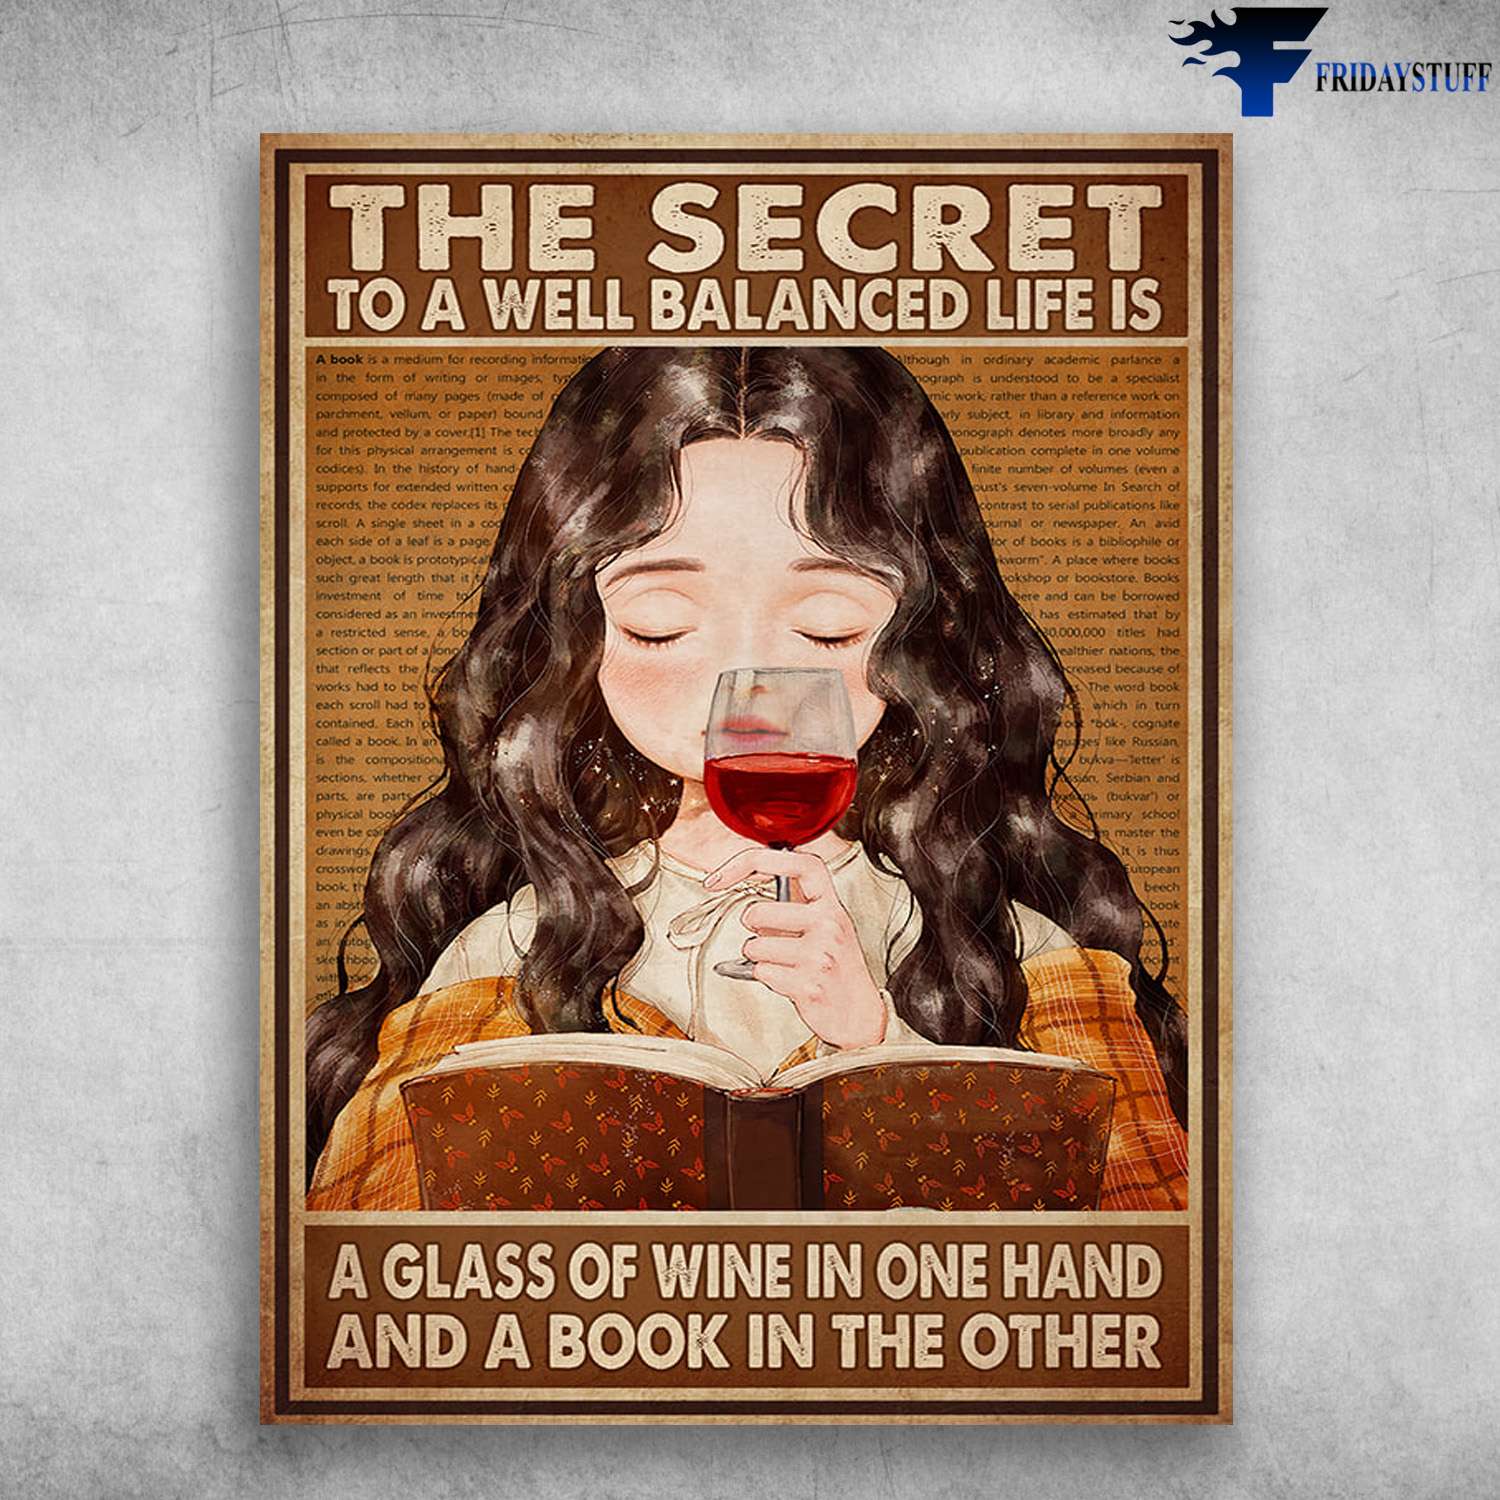 Book Reading, Book And Wine - The Secret To A Well Balanced Life, A Glass Of Wine In One Hand, And A Book In The Other